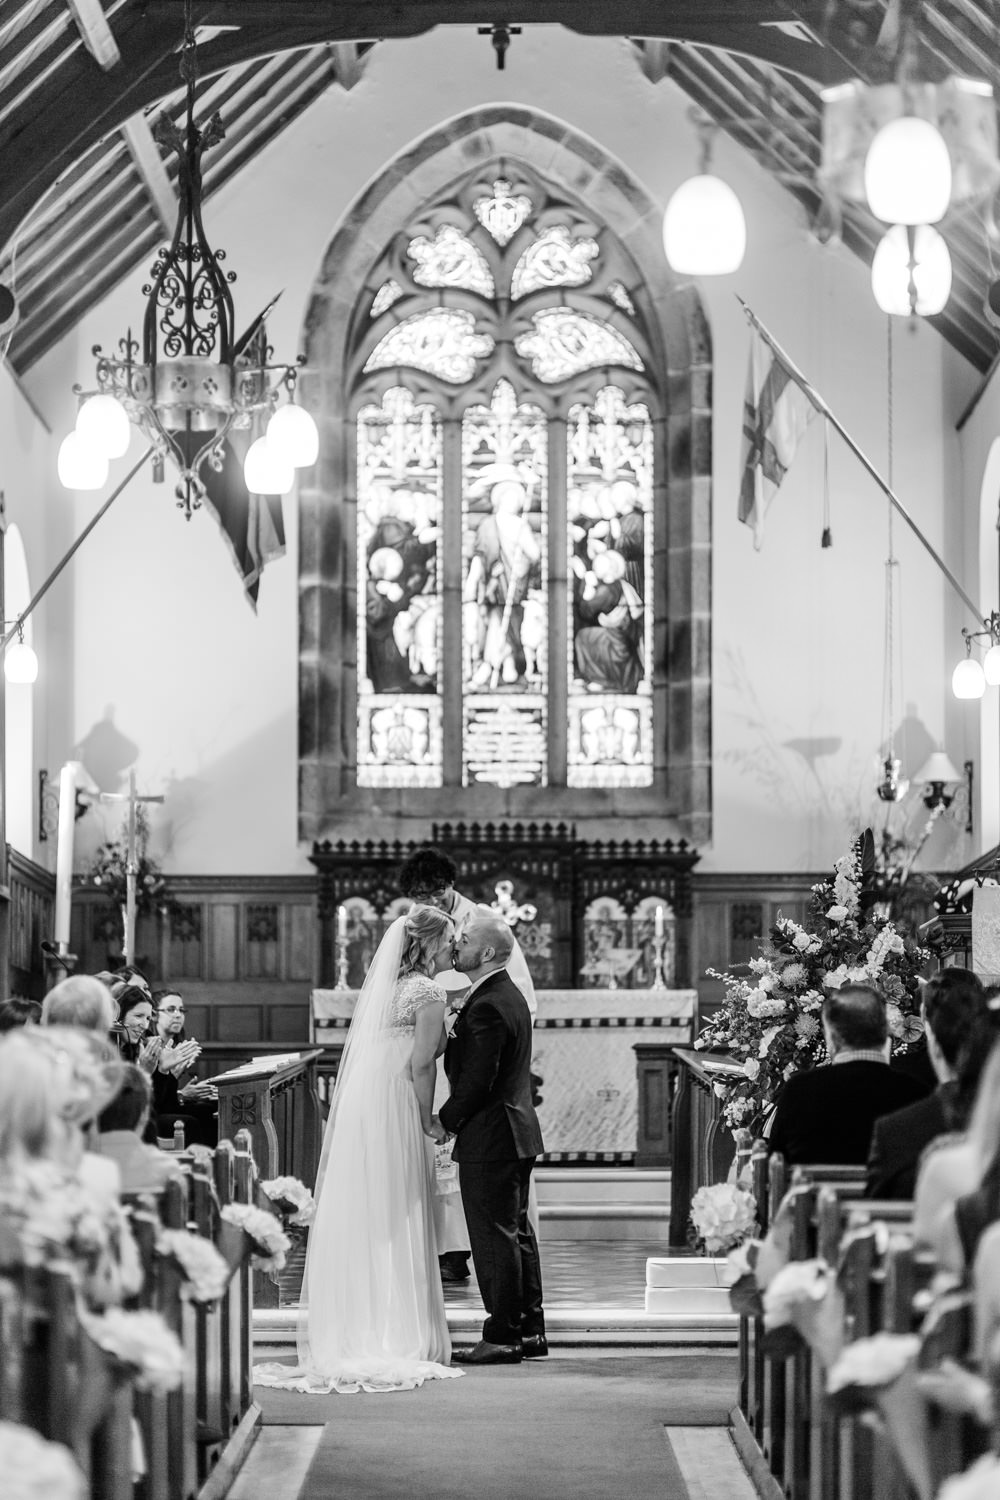 A bride and groom at St Peter's Church in Guernsey